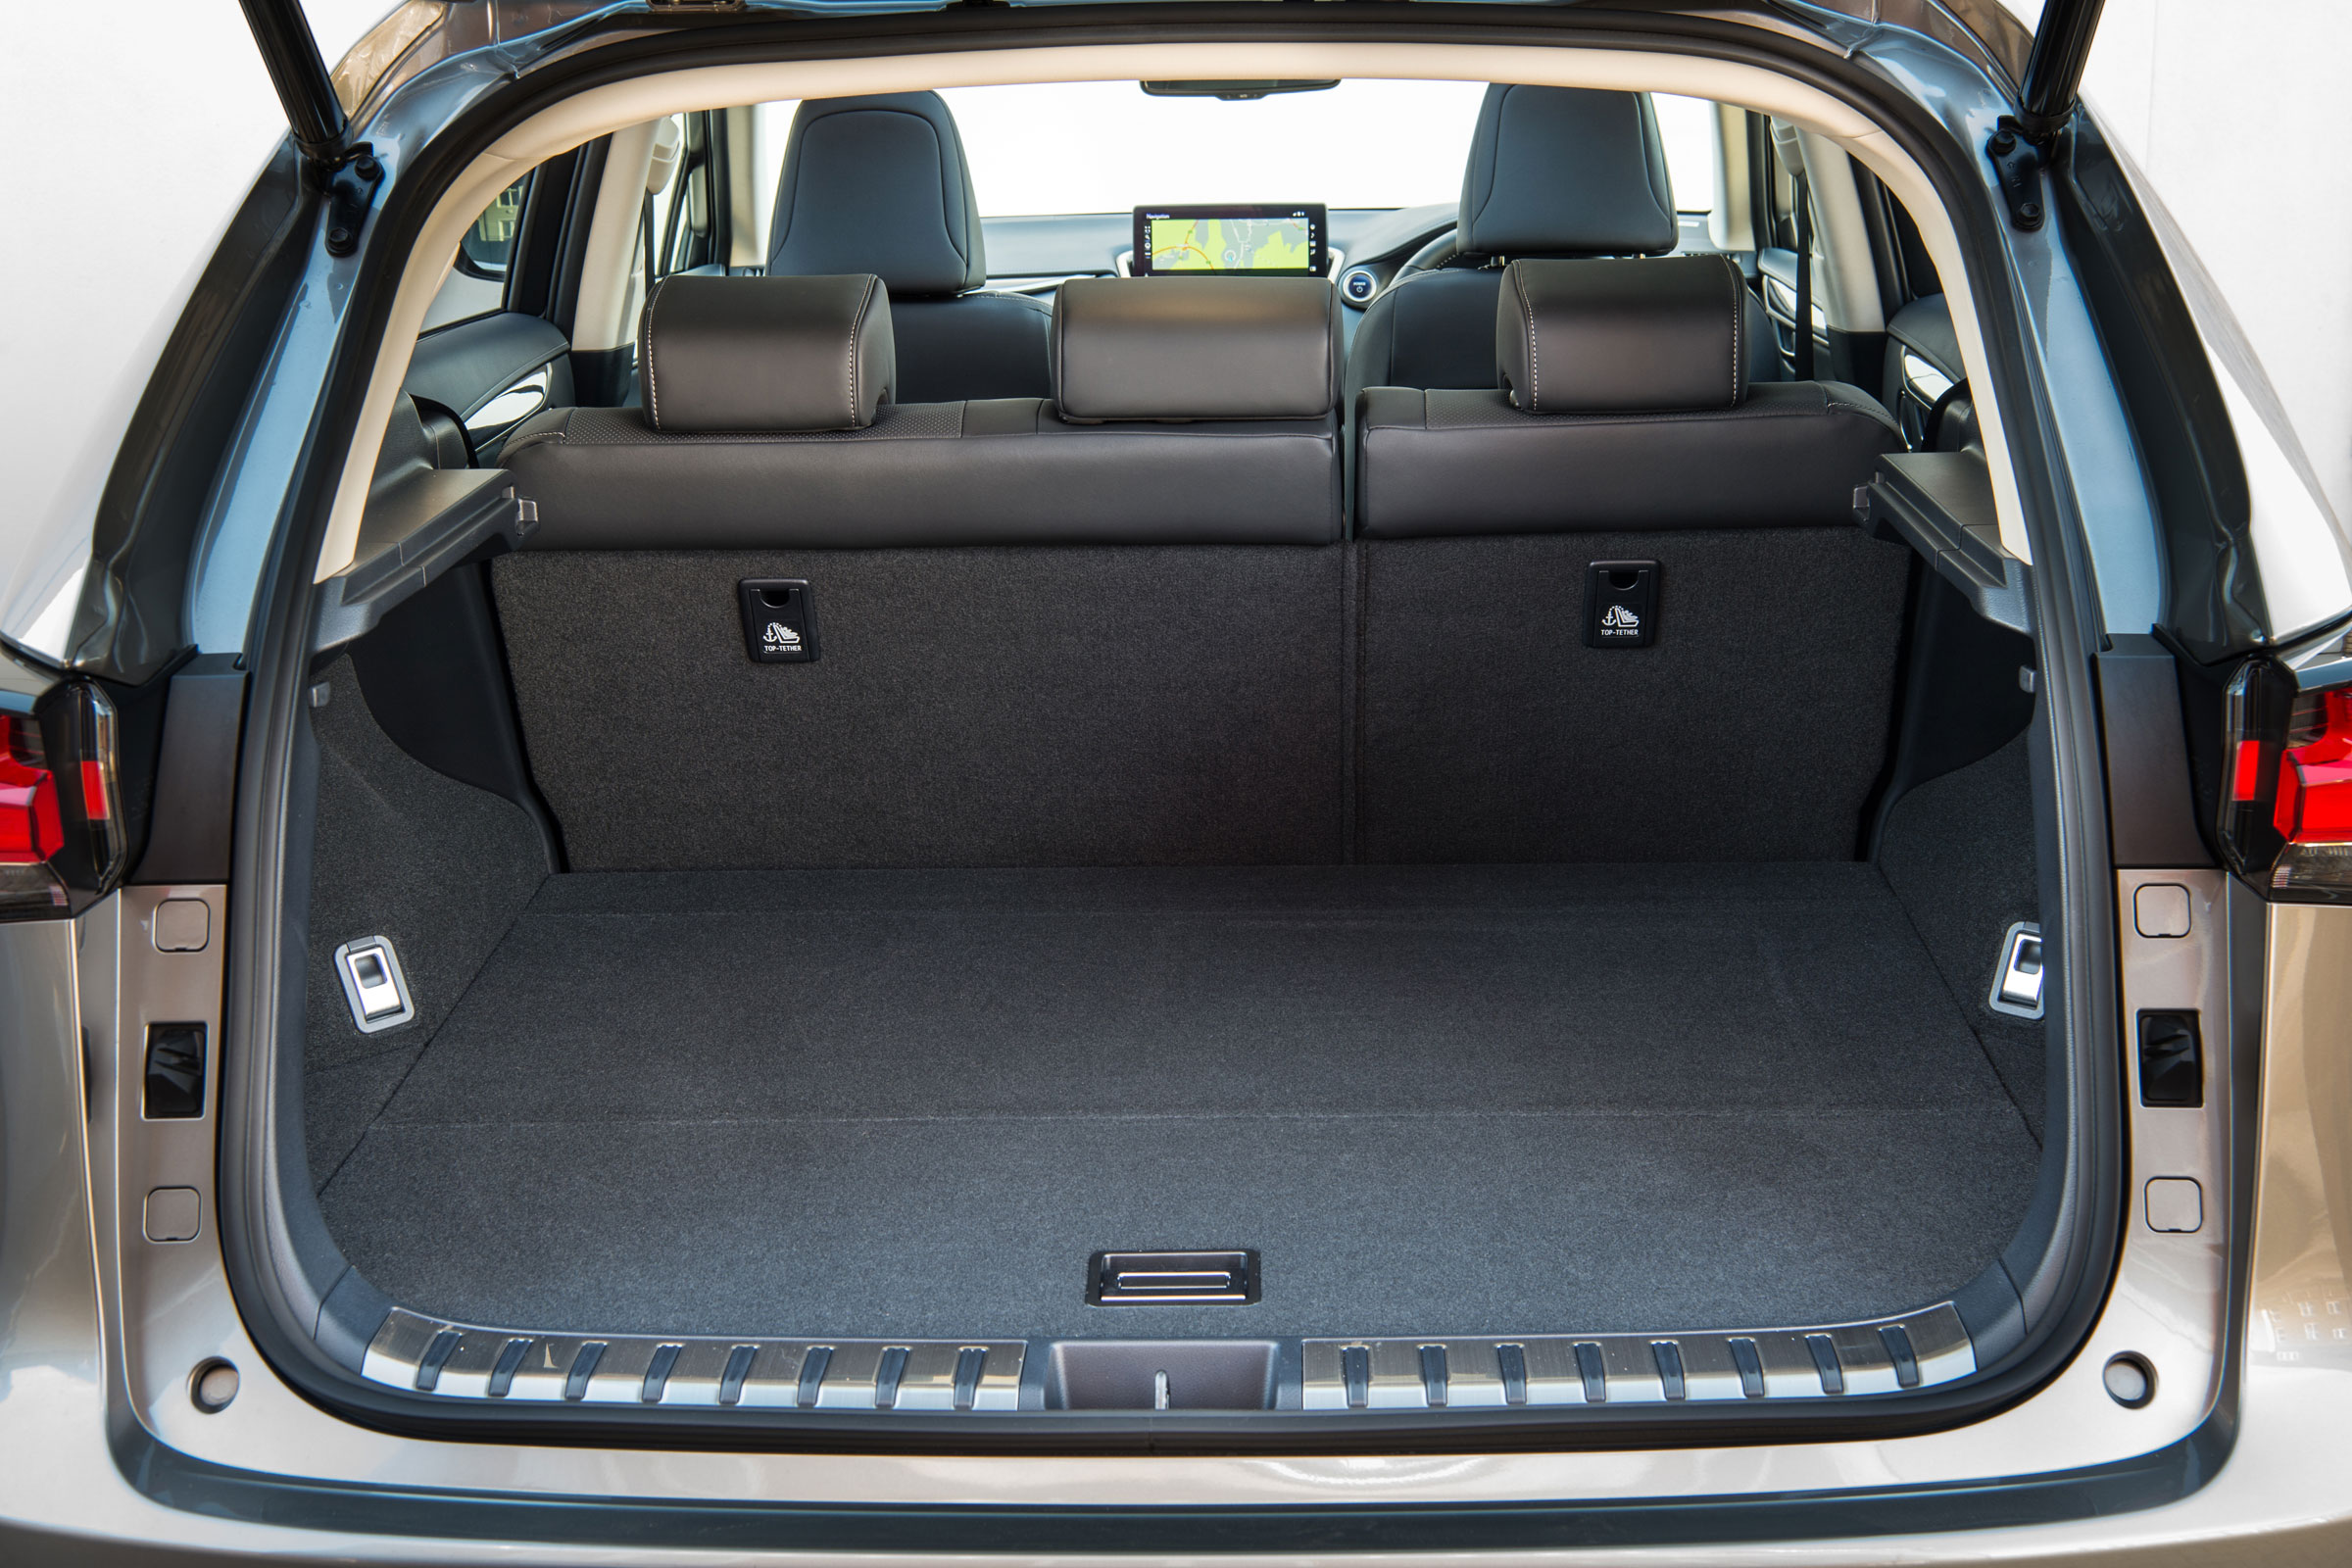 Lexus NX 300h practicality & boot space DrivingElectric